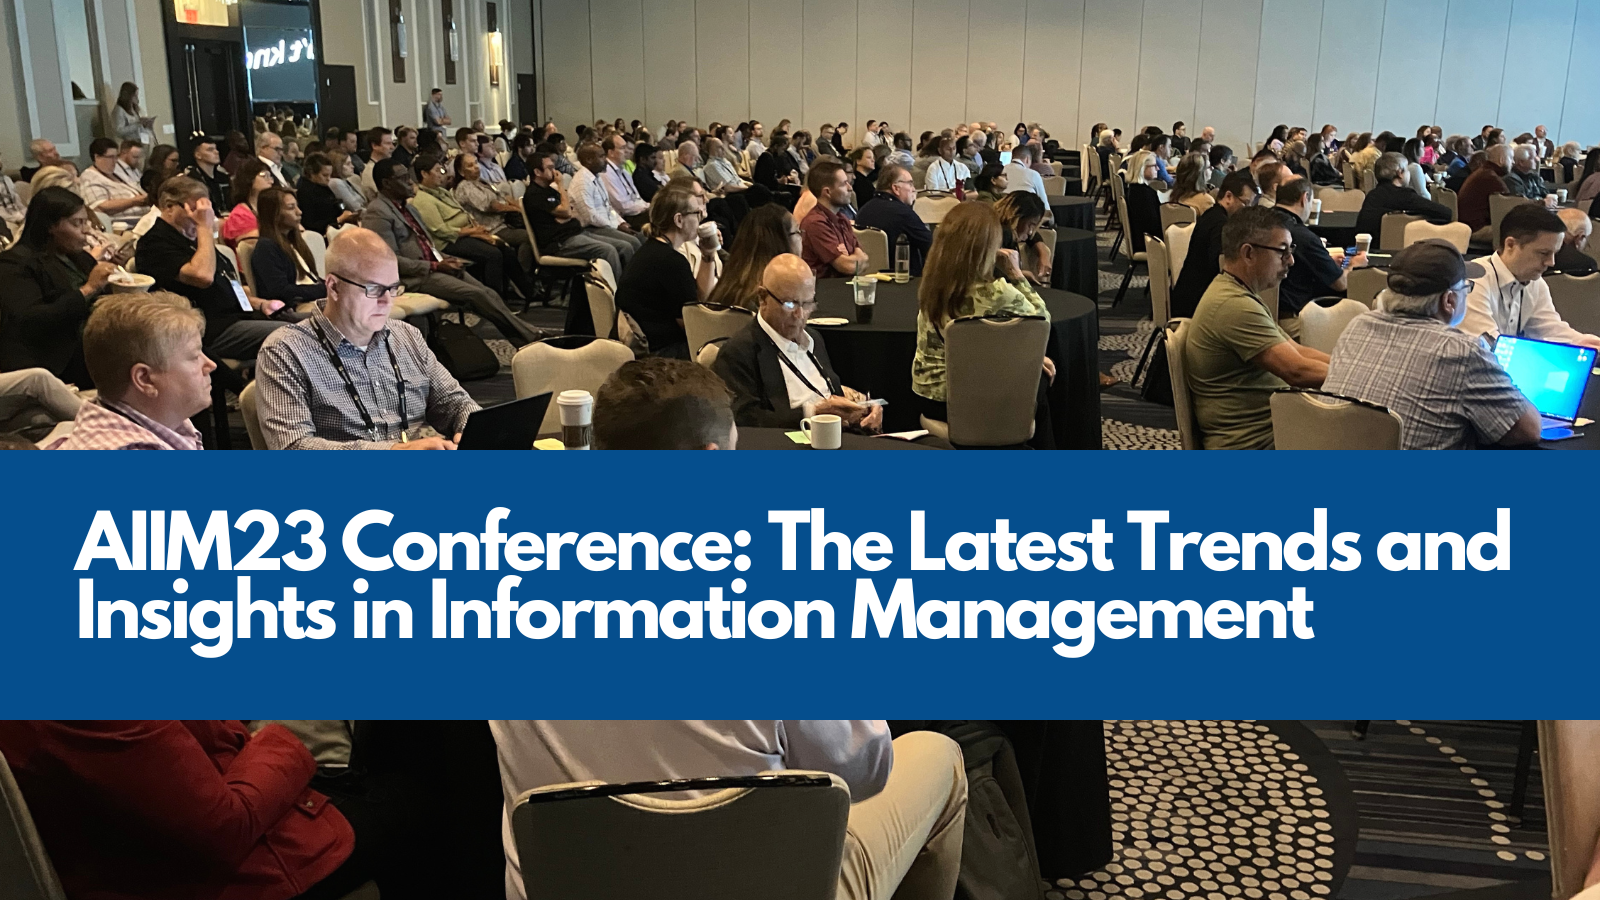 AIIM23 Conference The Latest Trends and Insights in Information Management